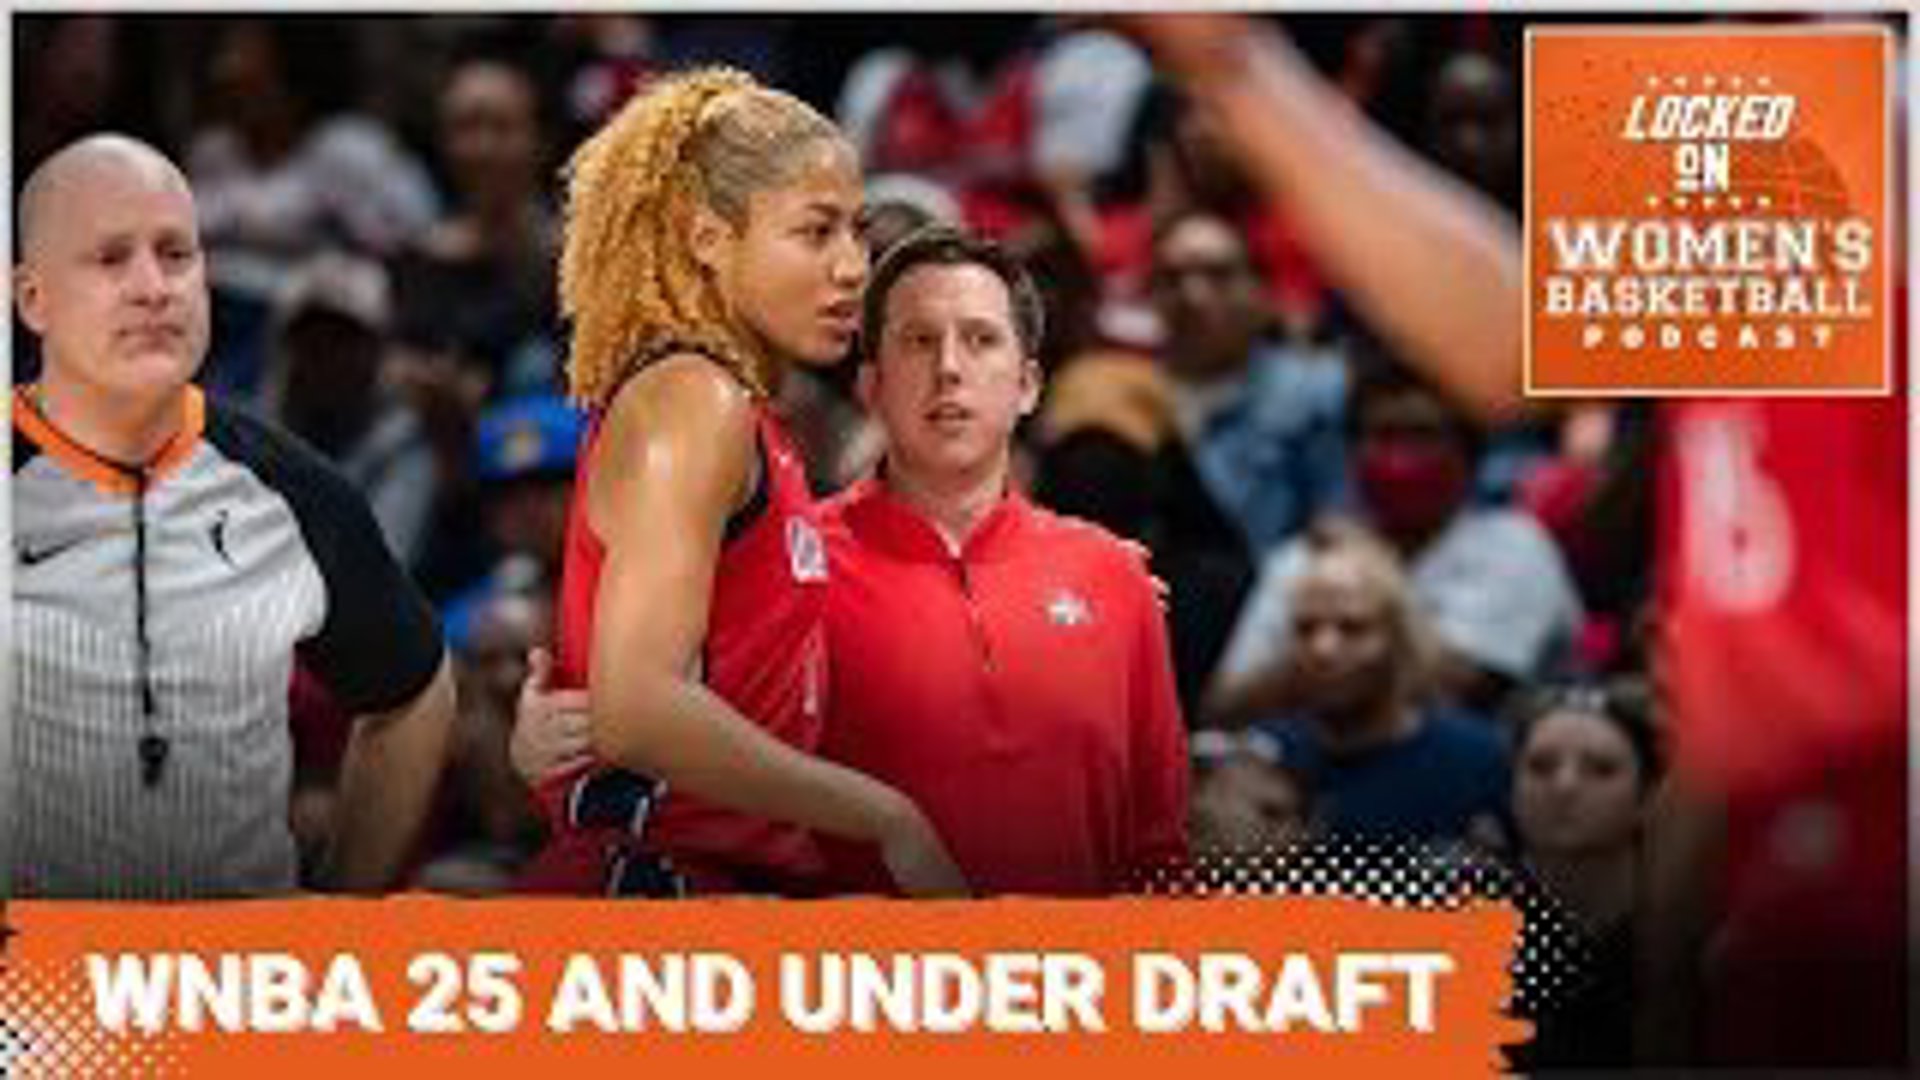 Who are the best players in the WNBA 25 years old or younger? Host Hunter Cruse is joined by co-hosts Em Adler and Lincoln Shafer to build the best young lineup.